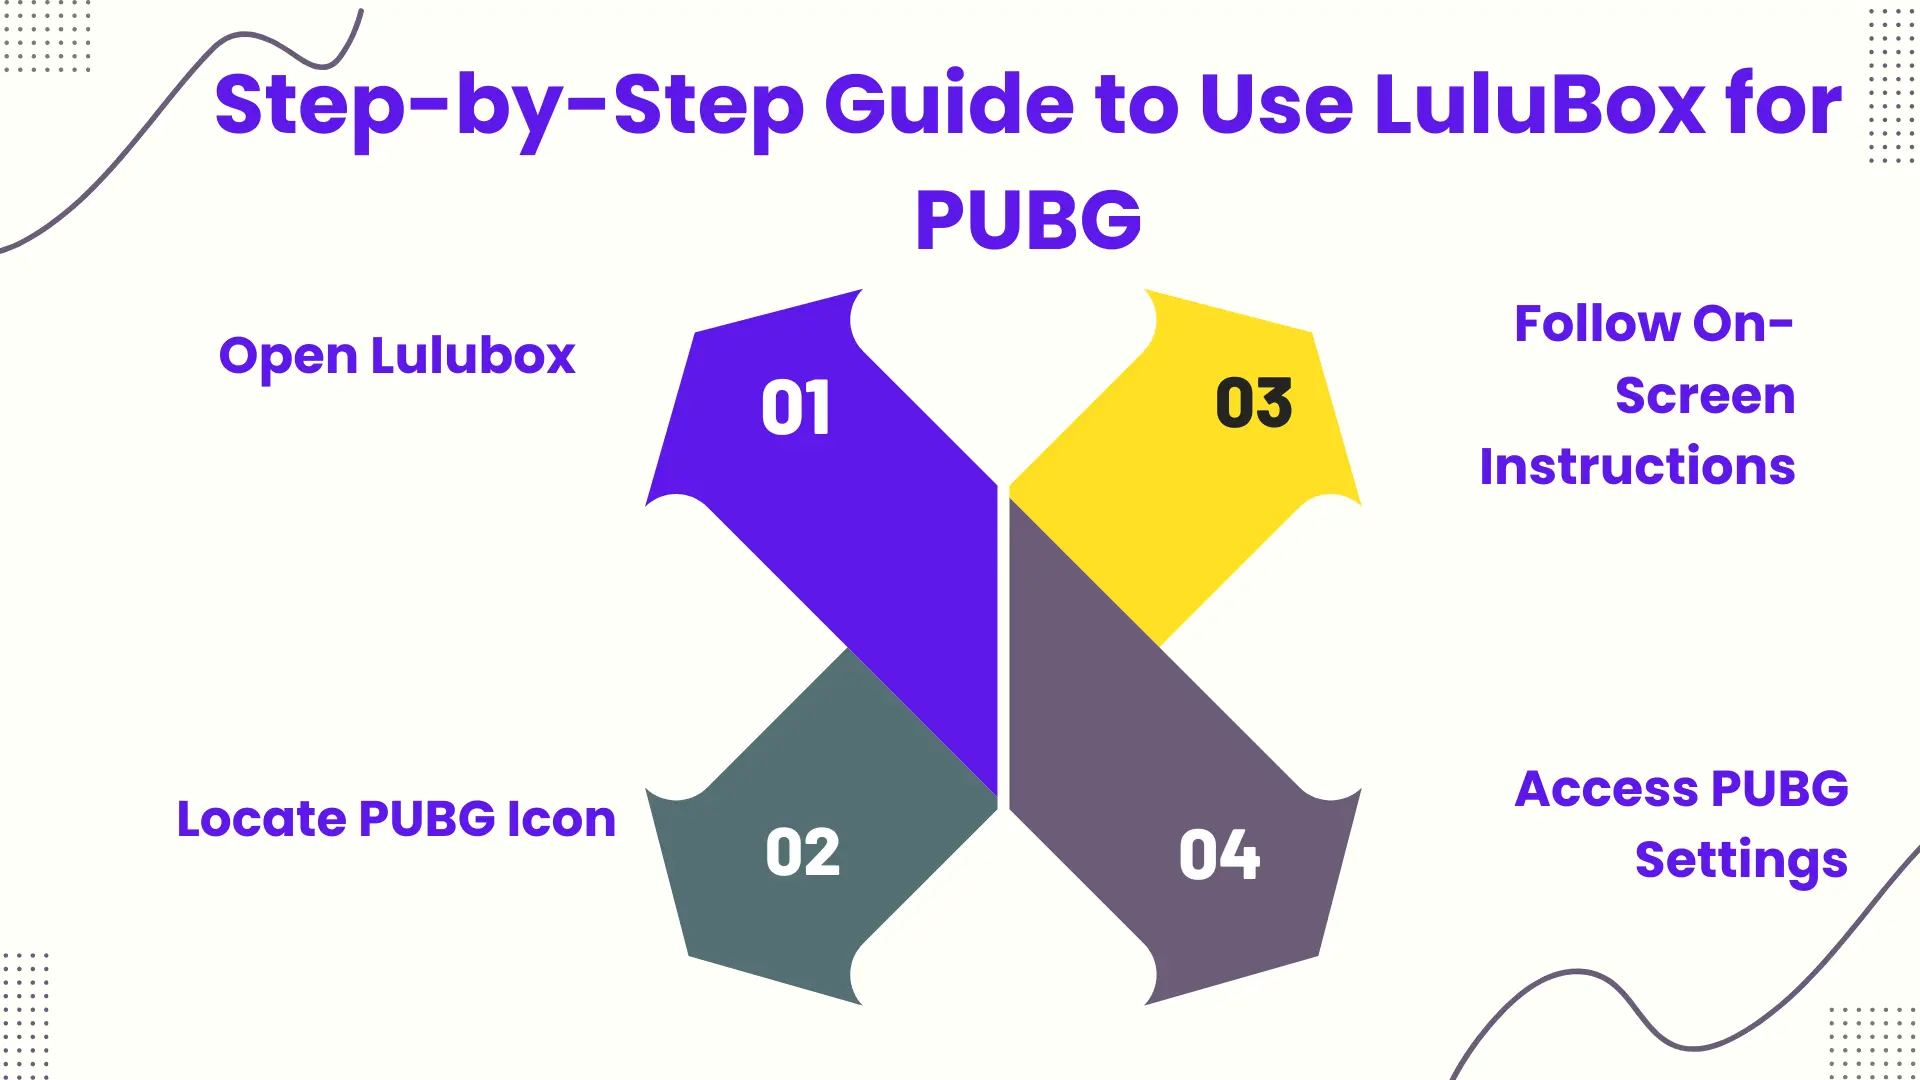 Guide to use Lulubox PUBG.